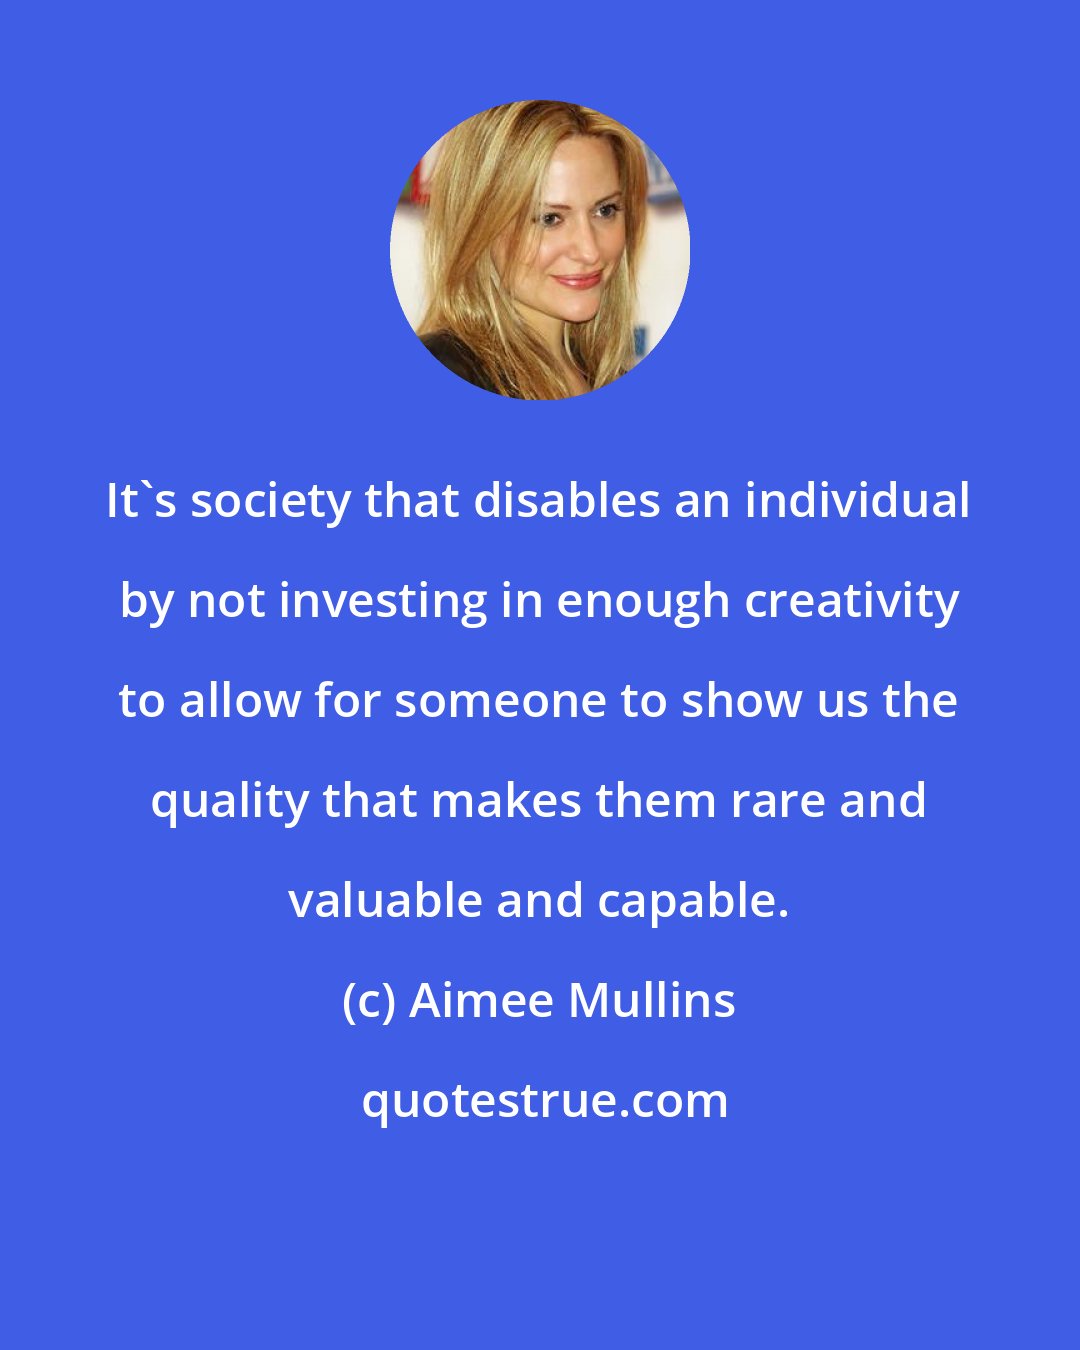 Aimee Mullins: It's society that disables an individual by not investing in enough creativity to allow for someone to show us the quality that makes them rare and valuable and capable.